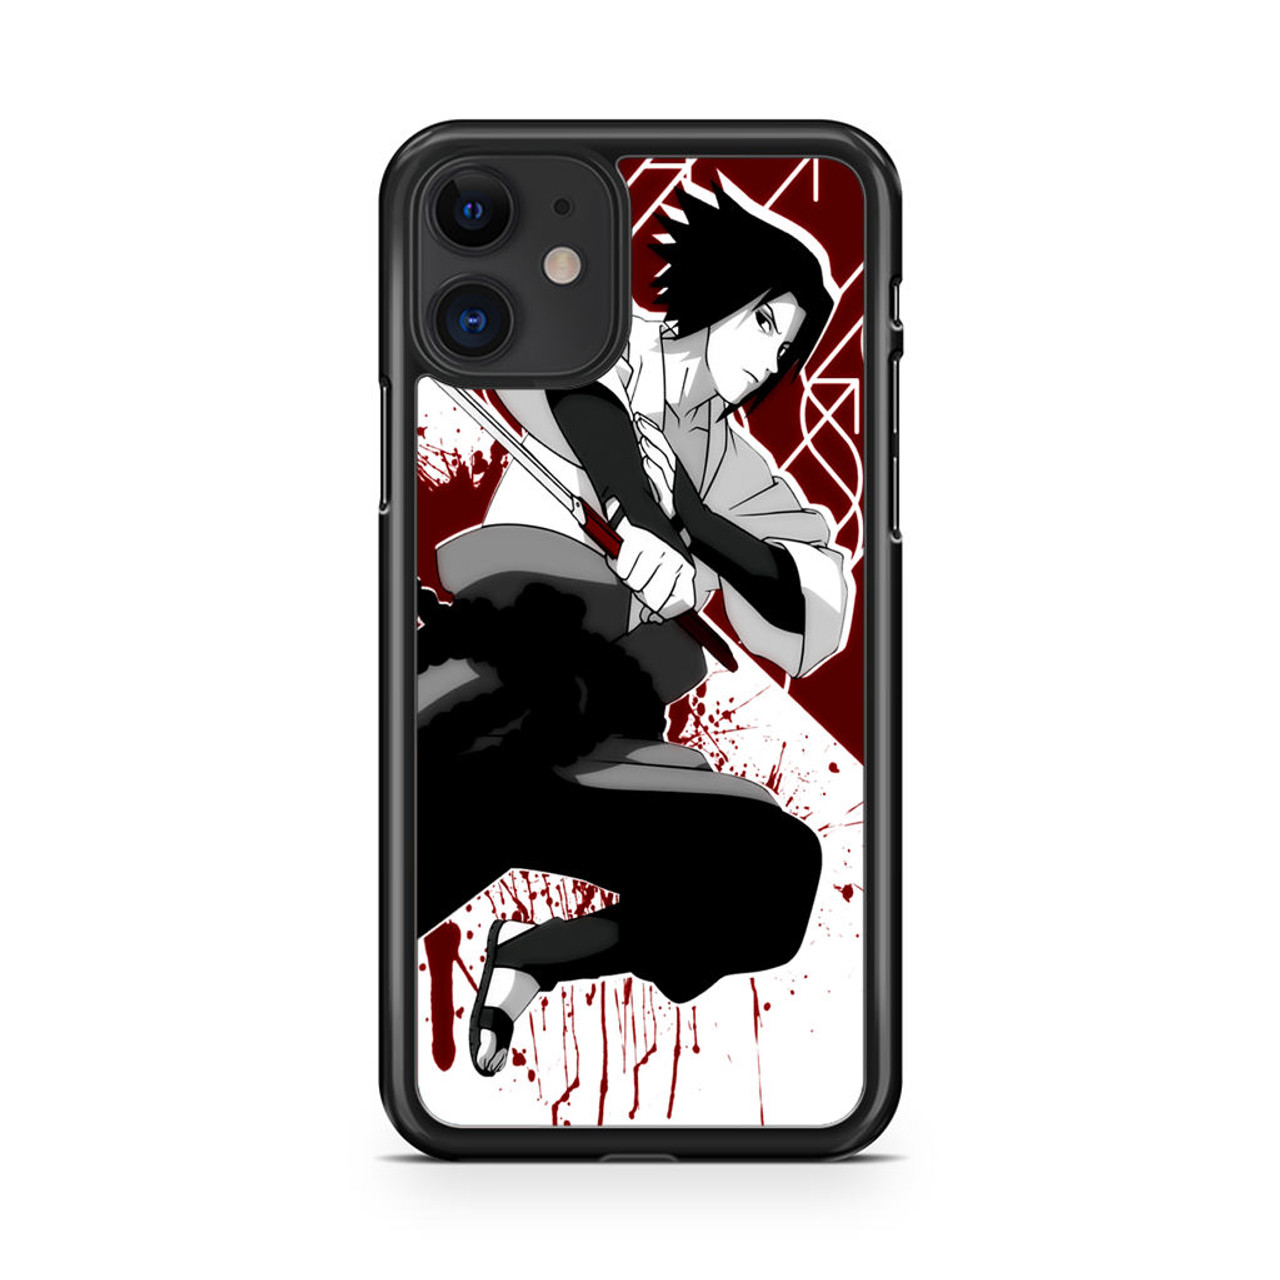 iPhone 11 Case Anime 1695 iPhone 11 Cases for Men Women Boy Girls  FanLuxury Design HD Fashion Pattern BackSoft Silicone TPU Shock  Protective Case for iPhone 11Clear  Amazonin Electronics